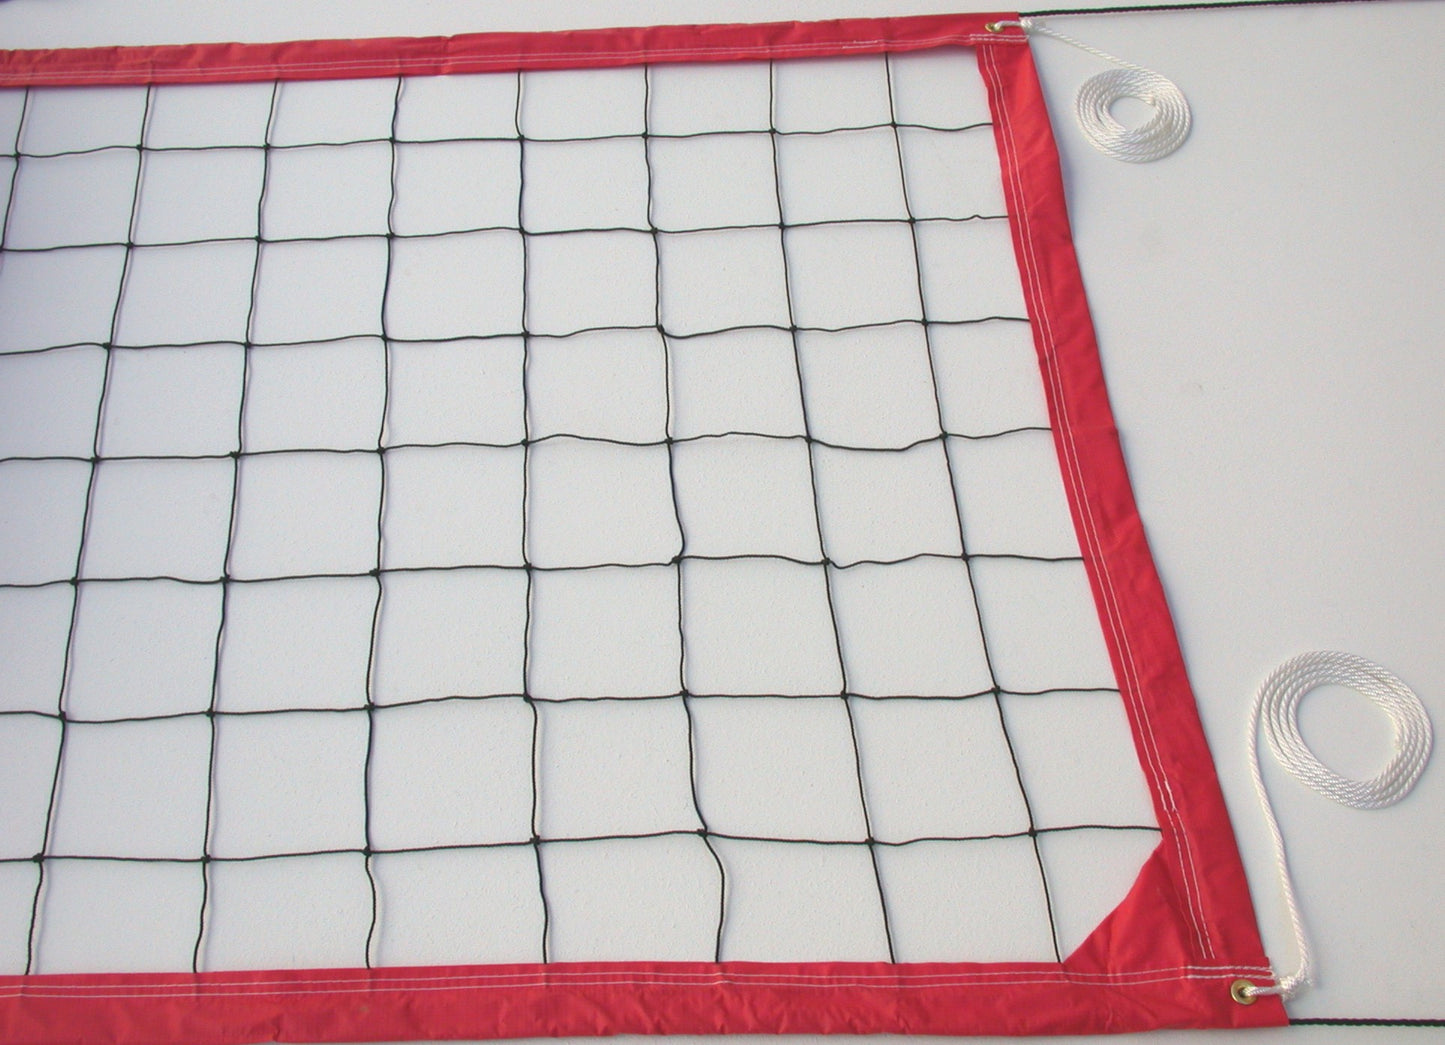 VRRR-Deluxe Volleyball Net Twisted Rope Red Vinyl